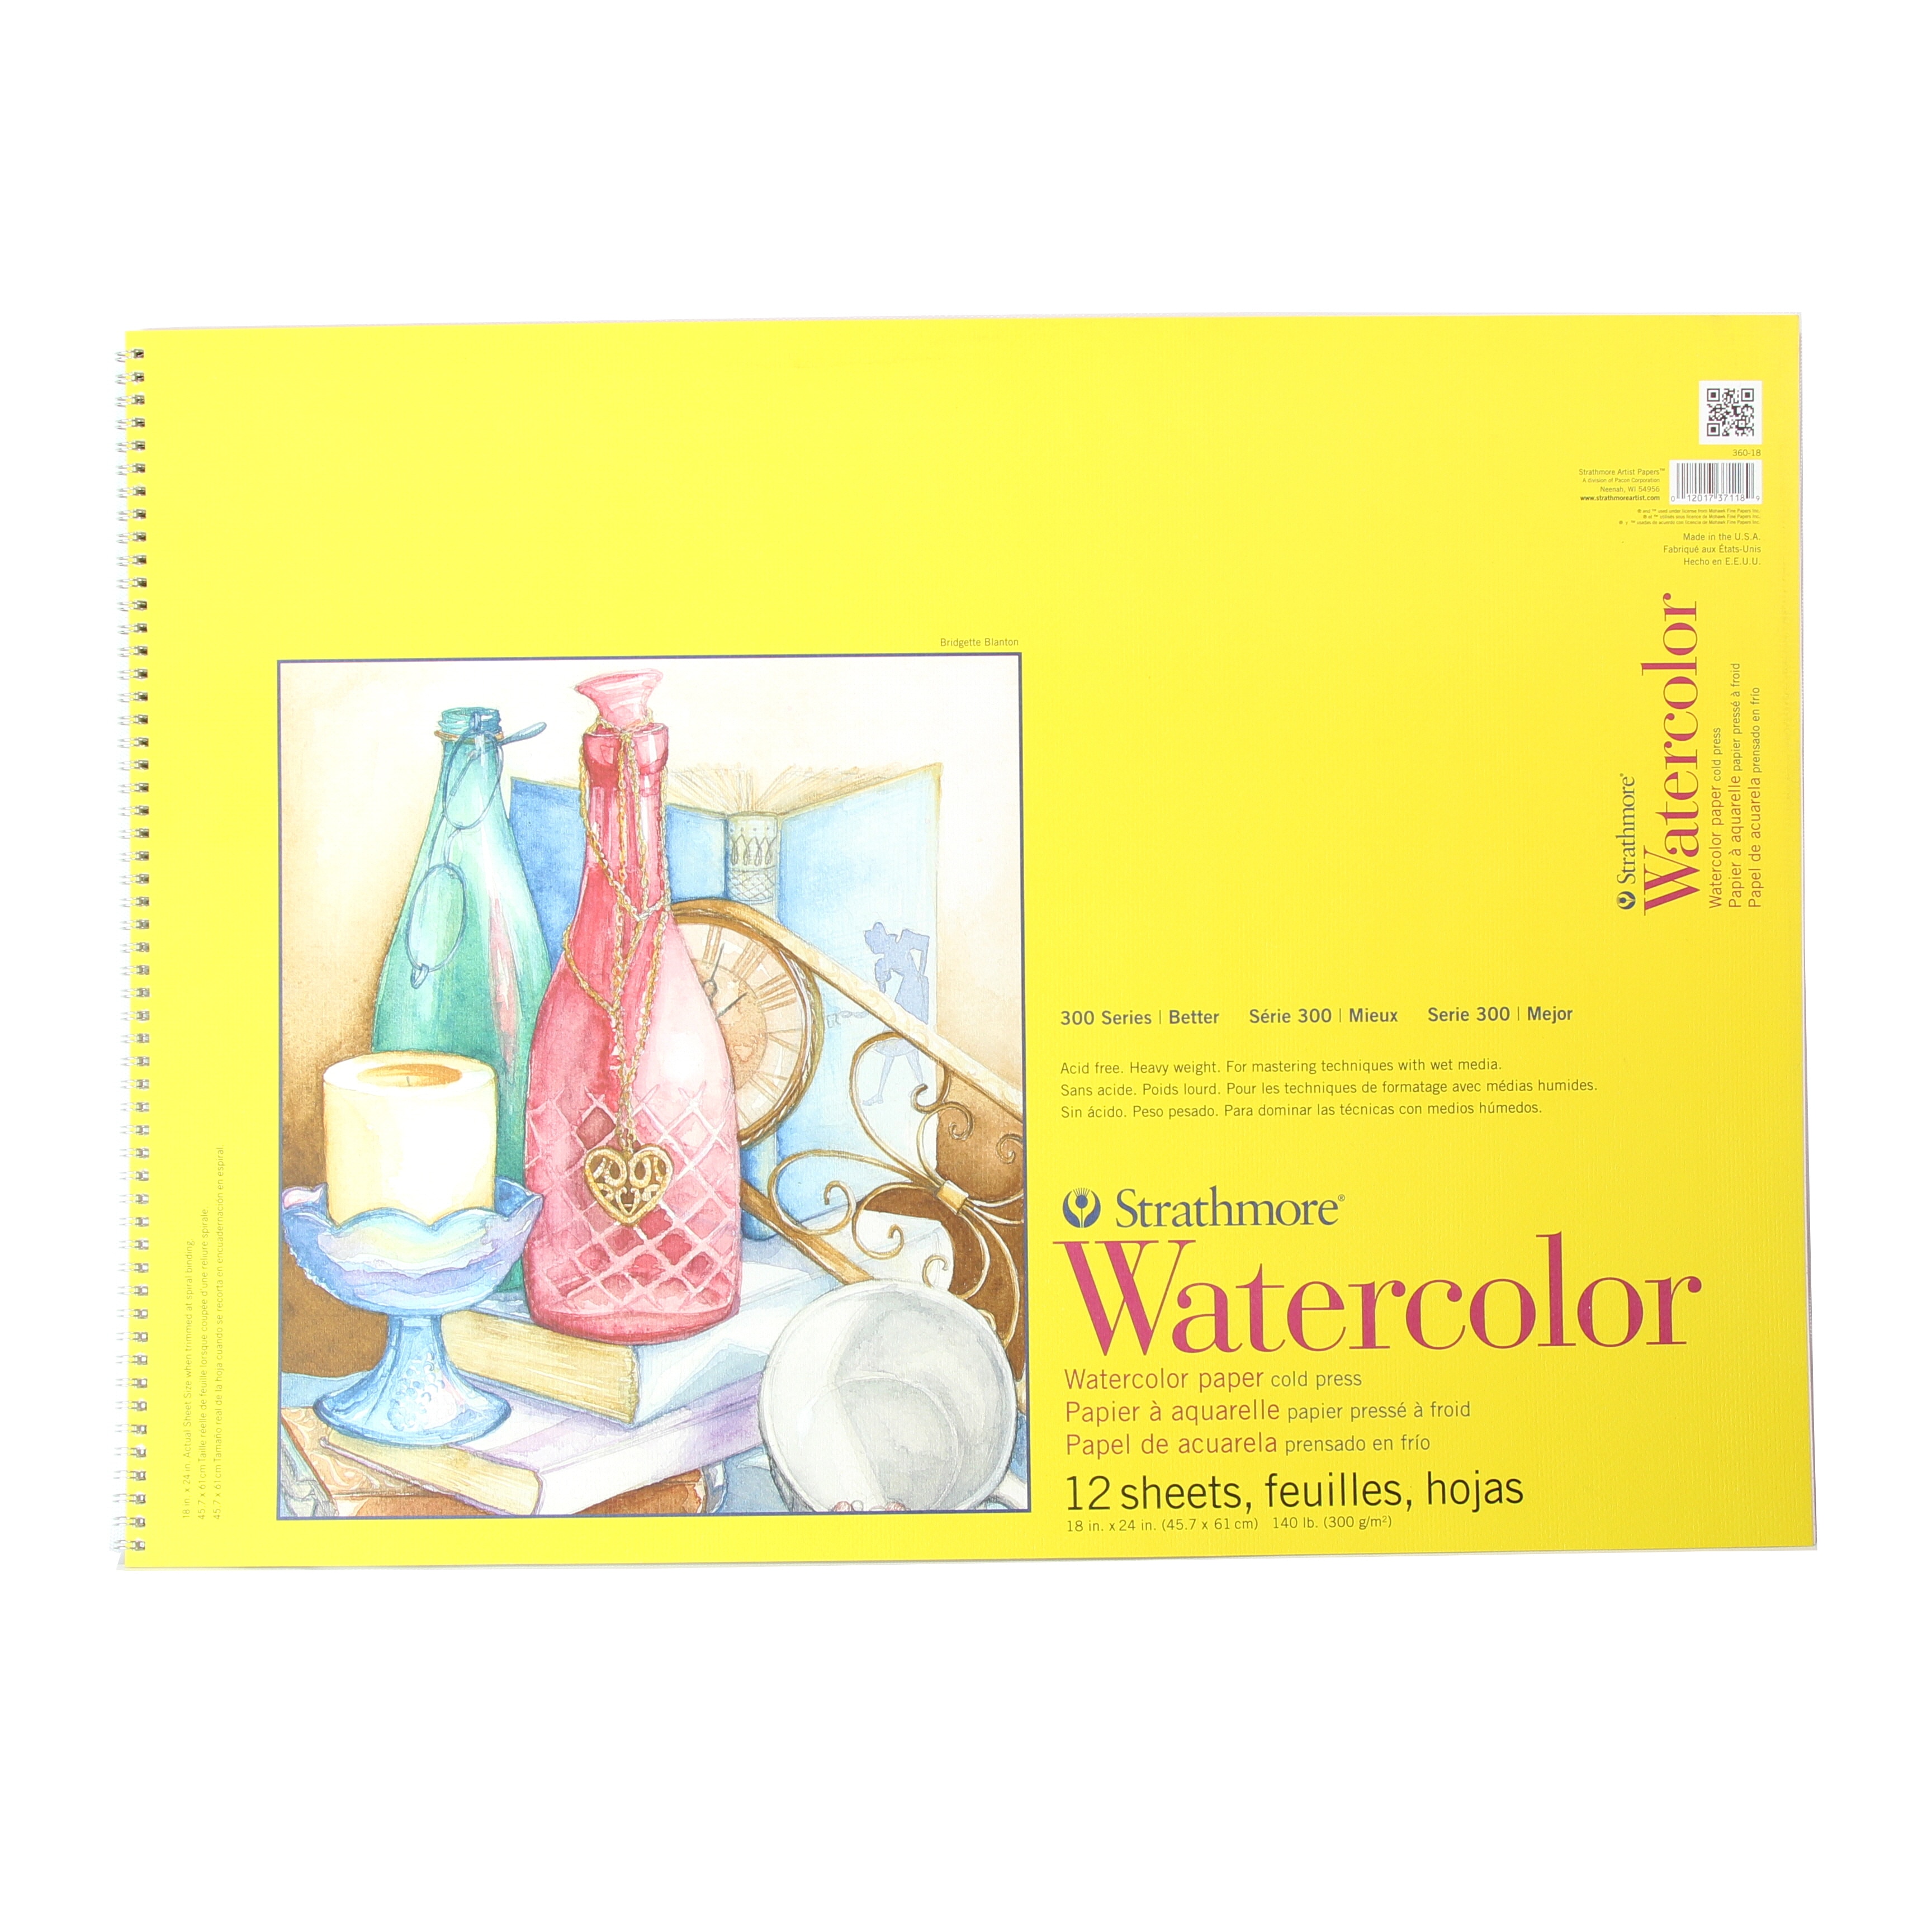 Strathmore Spiral Bound Watercolor Paper Pad 300 Series (18 x 24)